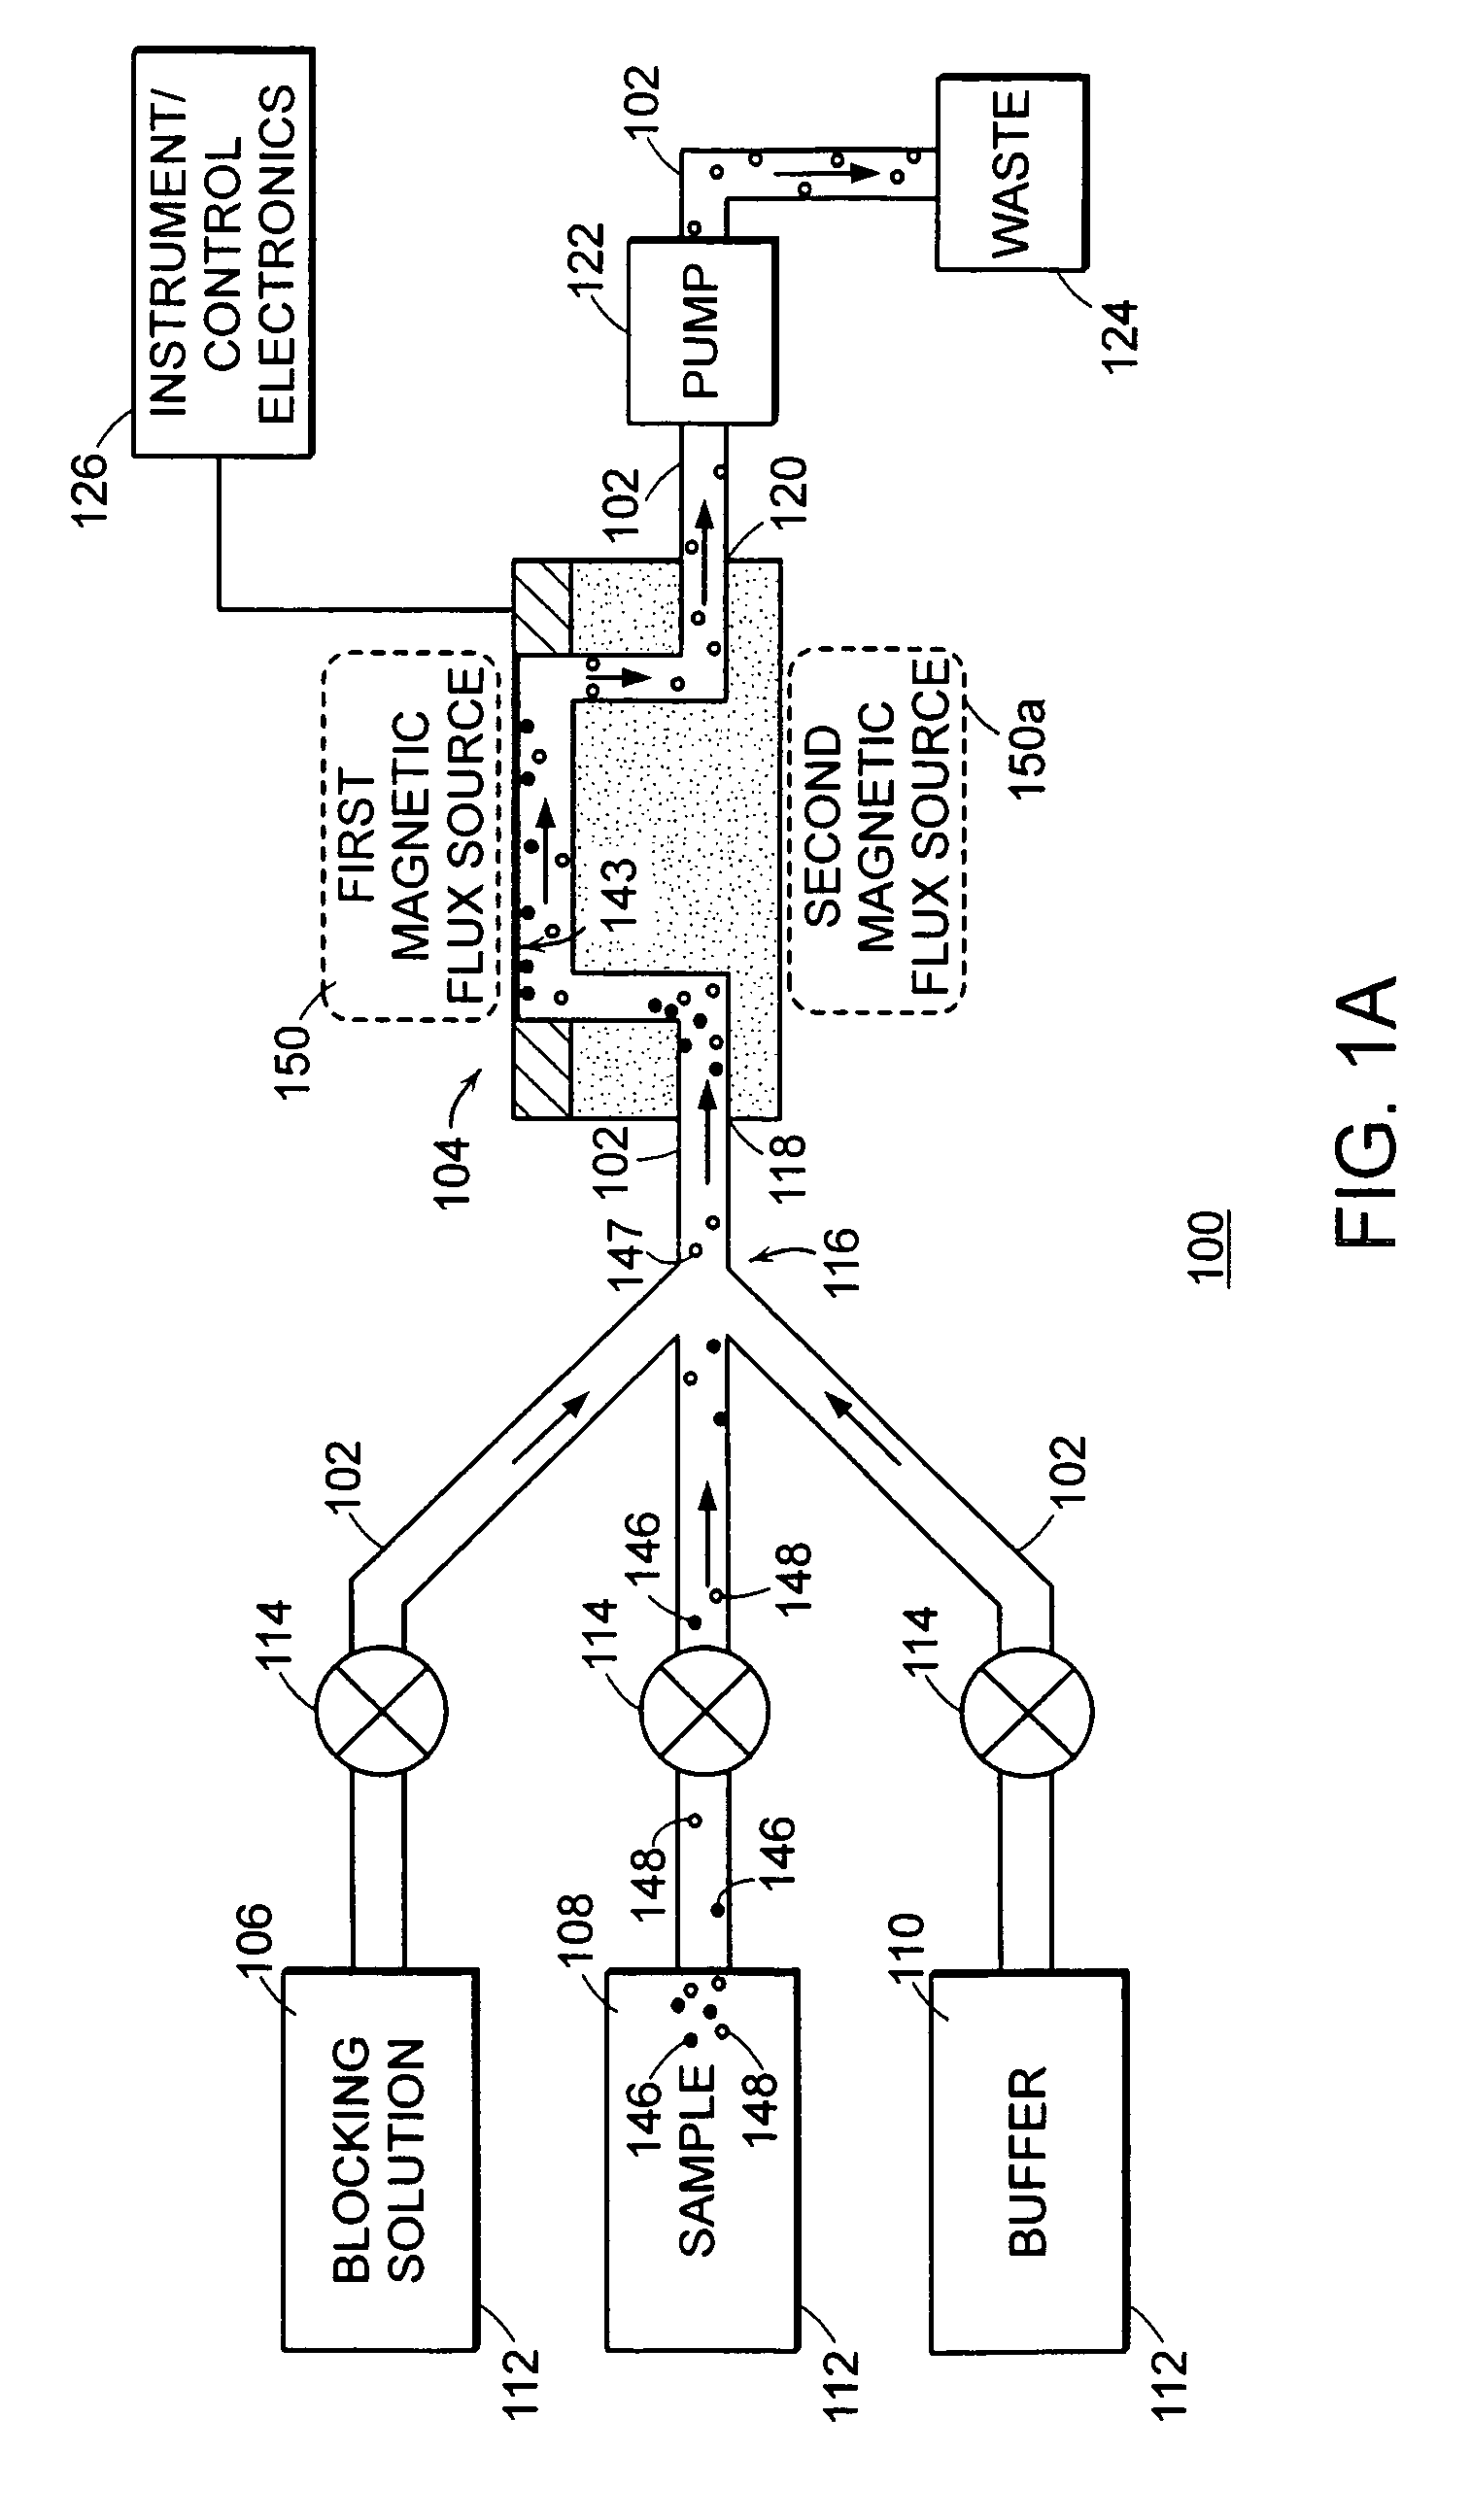 Method and apparatus for therapeutic drug monitoring using an acoustic device